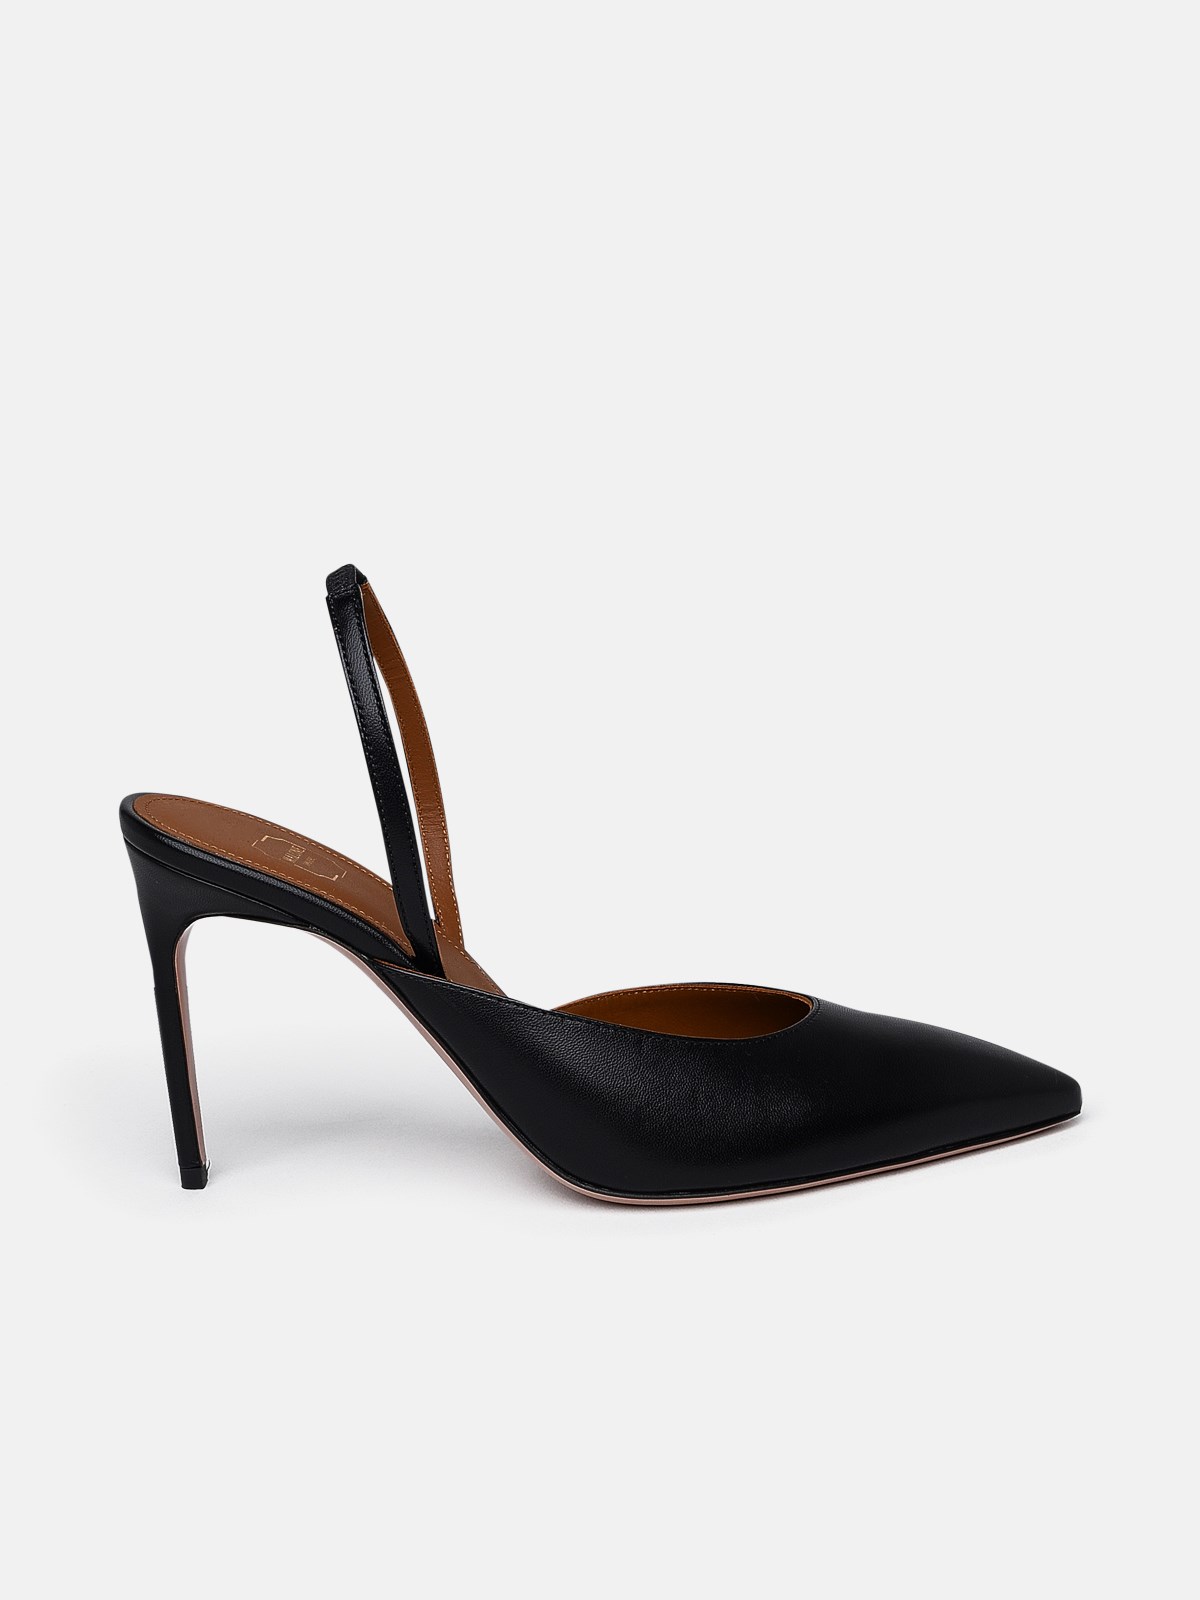 Malone Souliers Gillan Black Leather Sandals